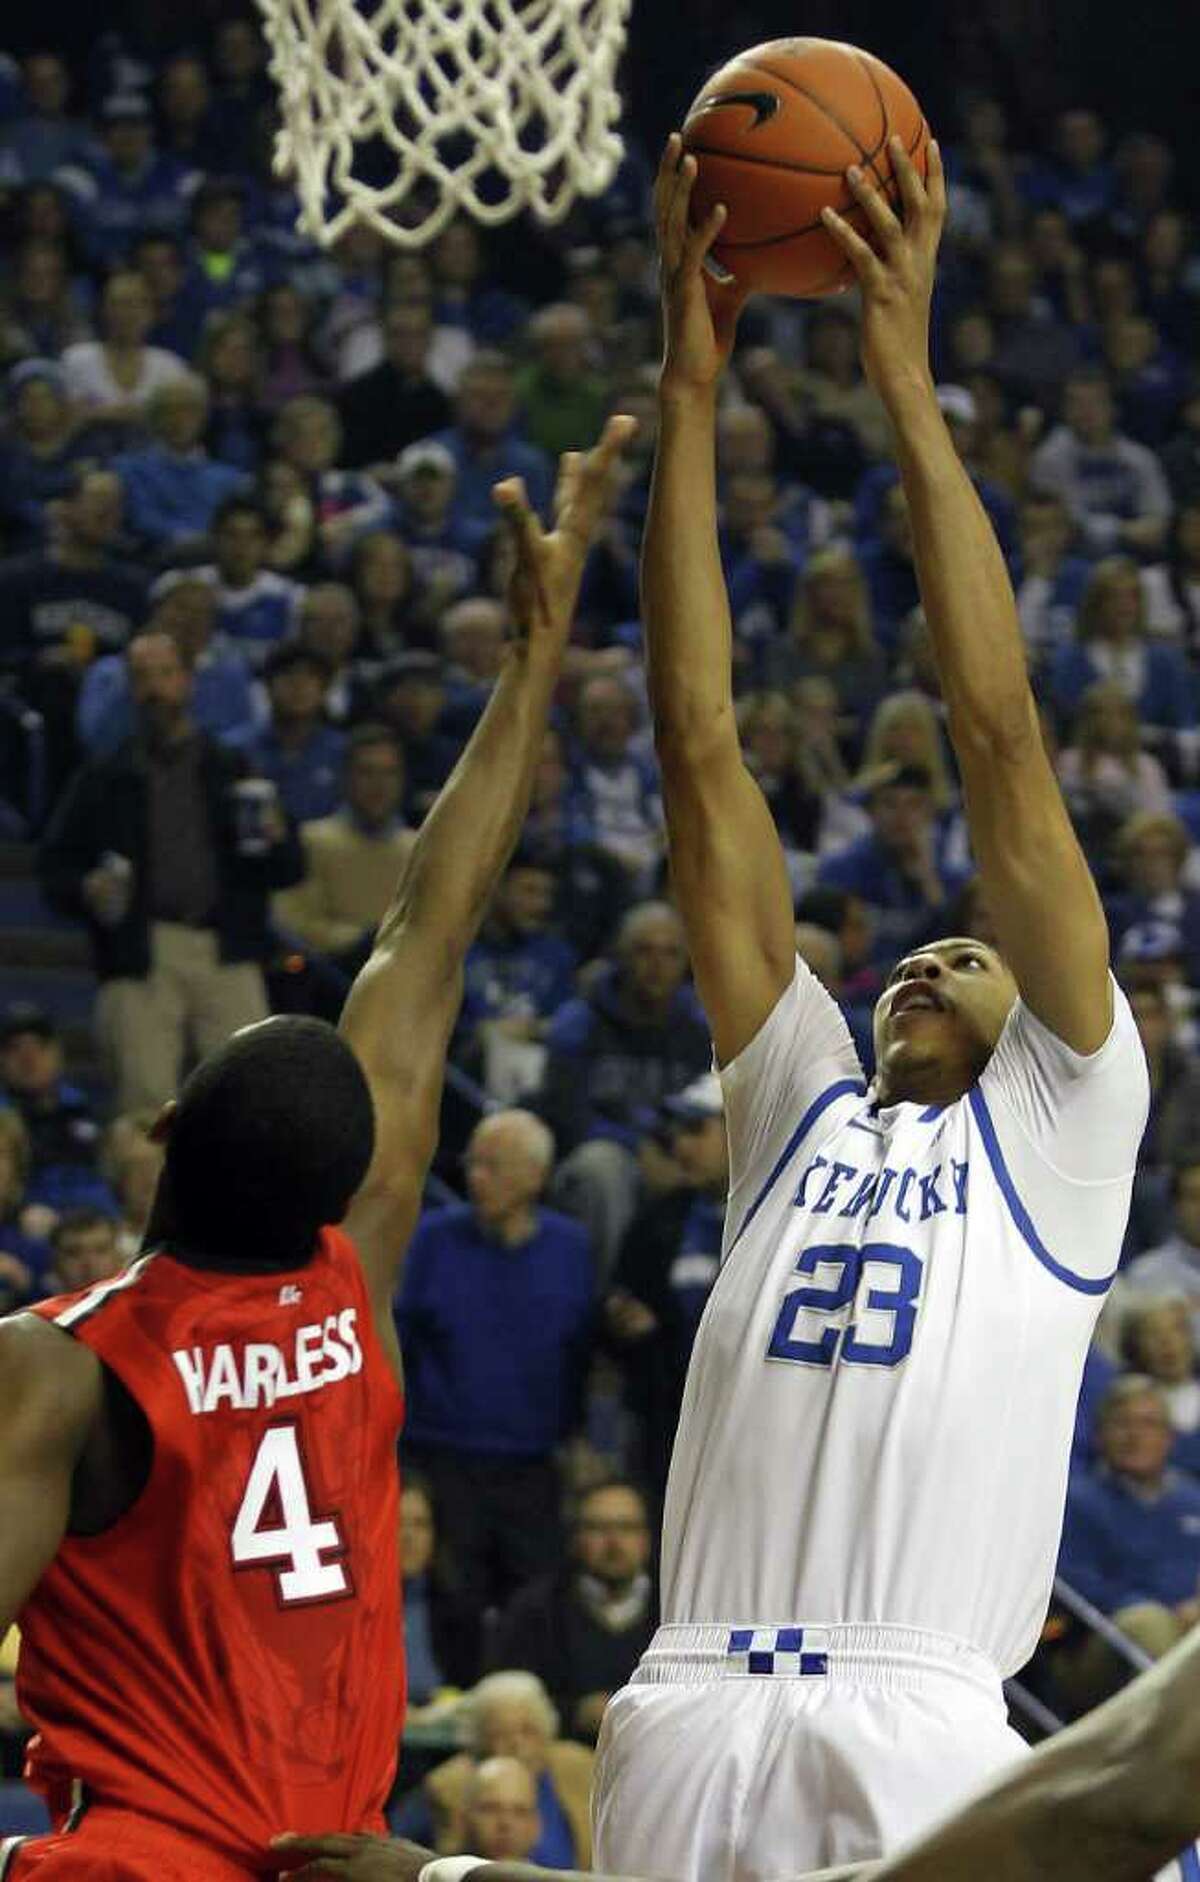 Kentucky freshman Anthony Davis (right) pulled down 15 rebounds to go with his 15 points and eight blocks.